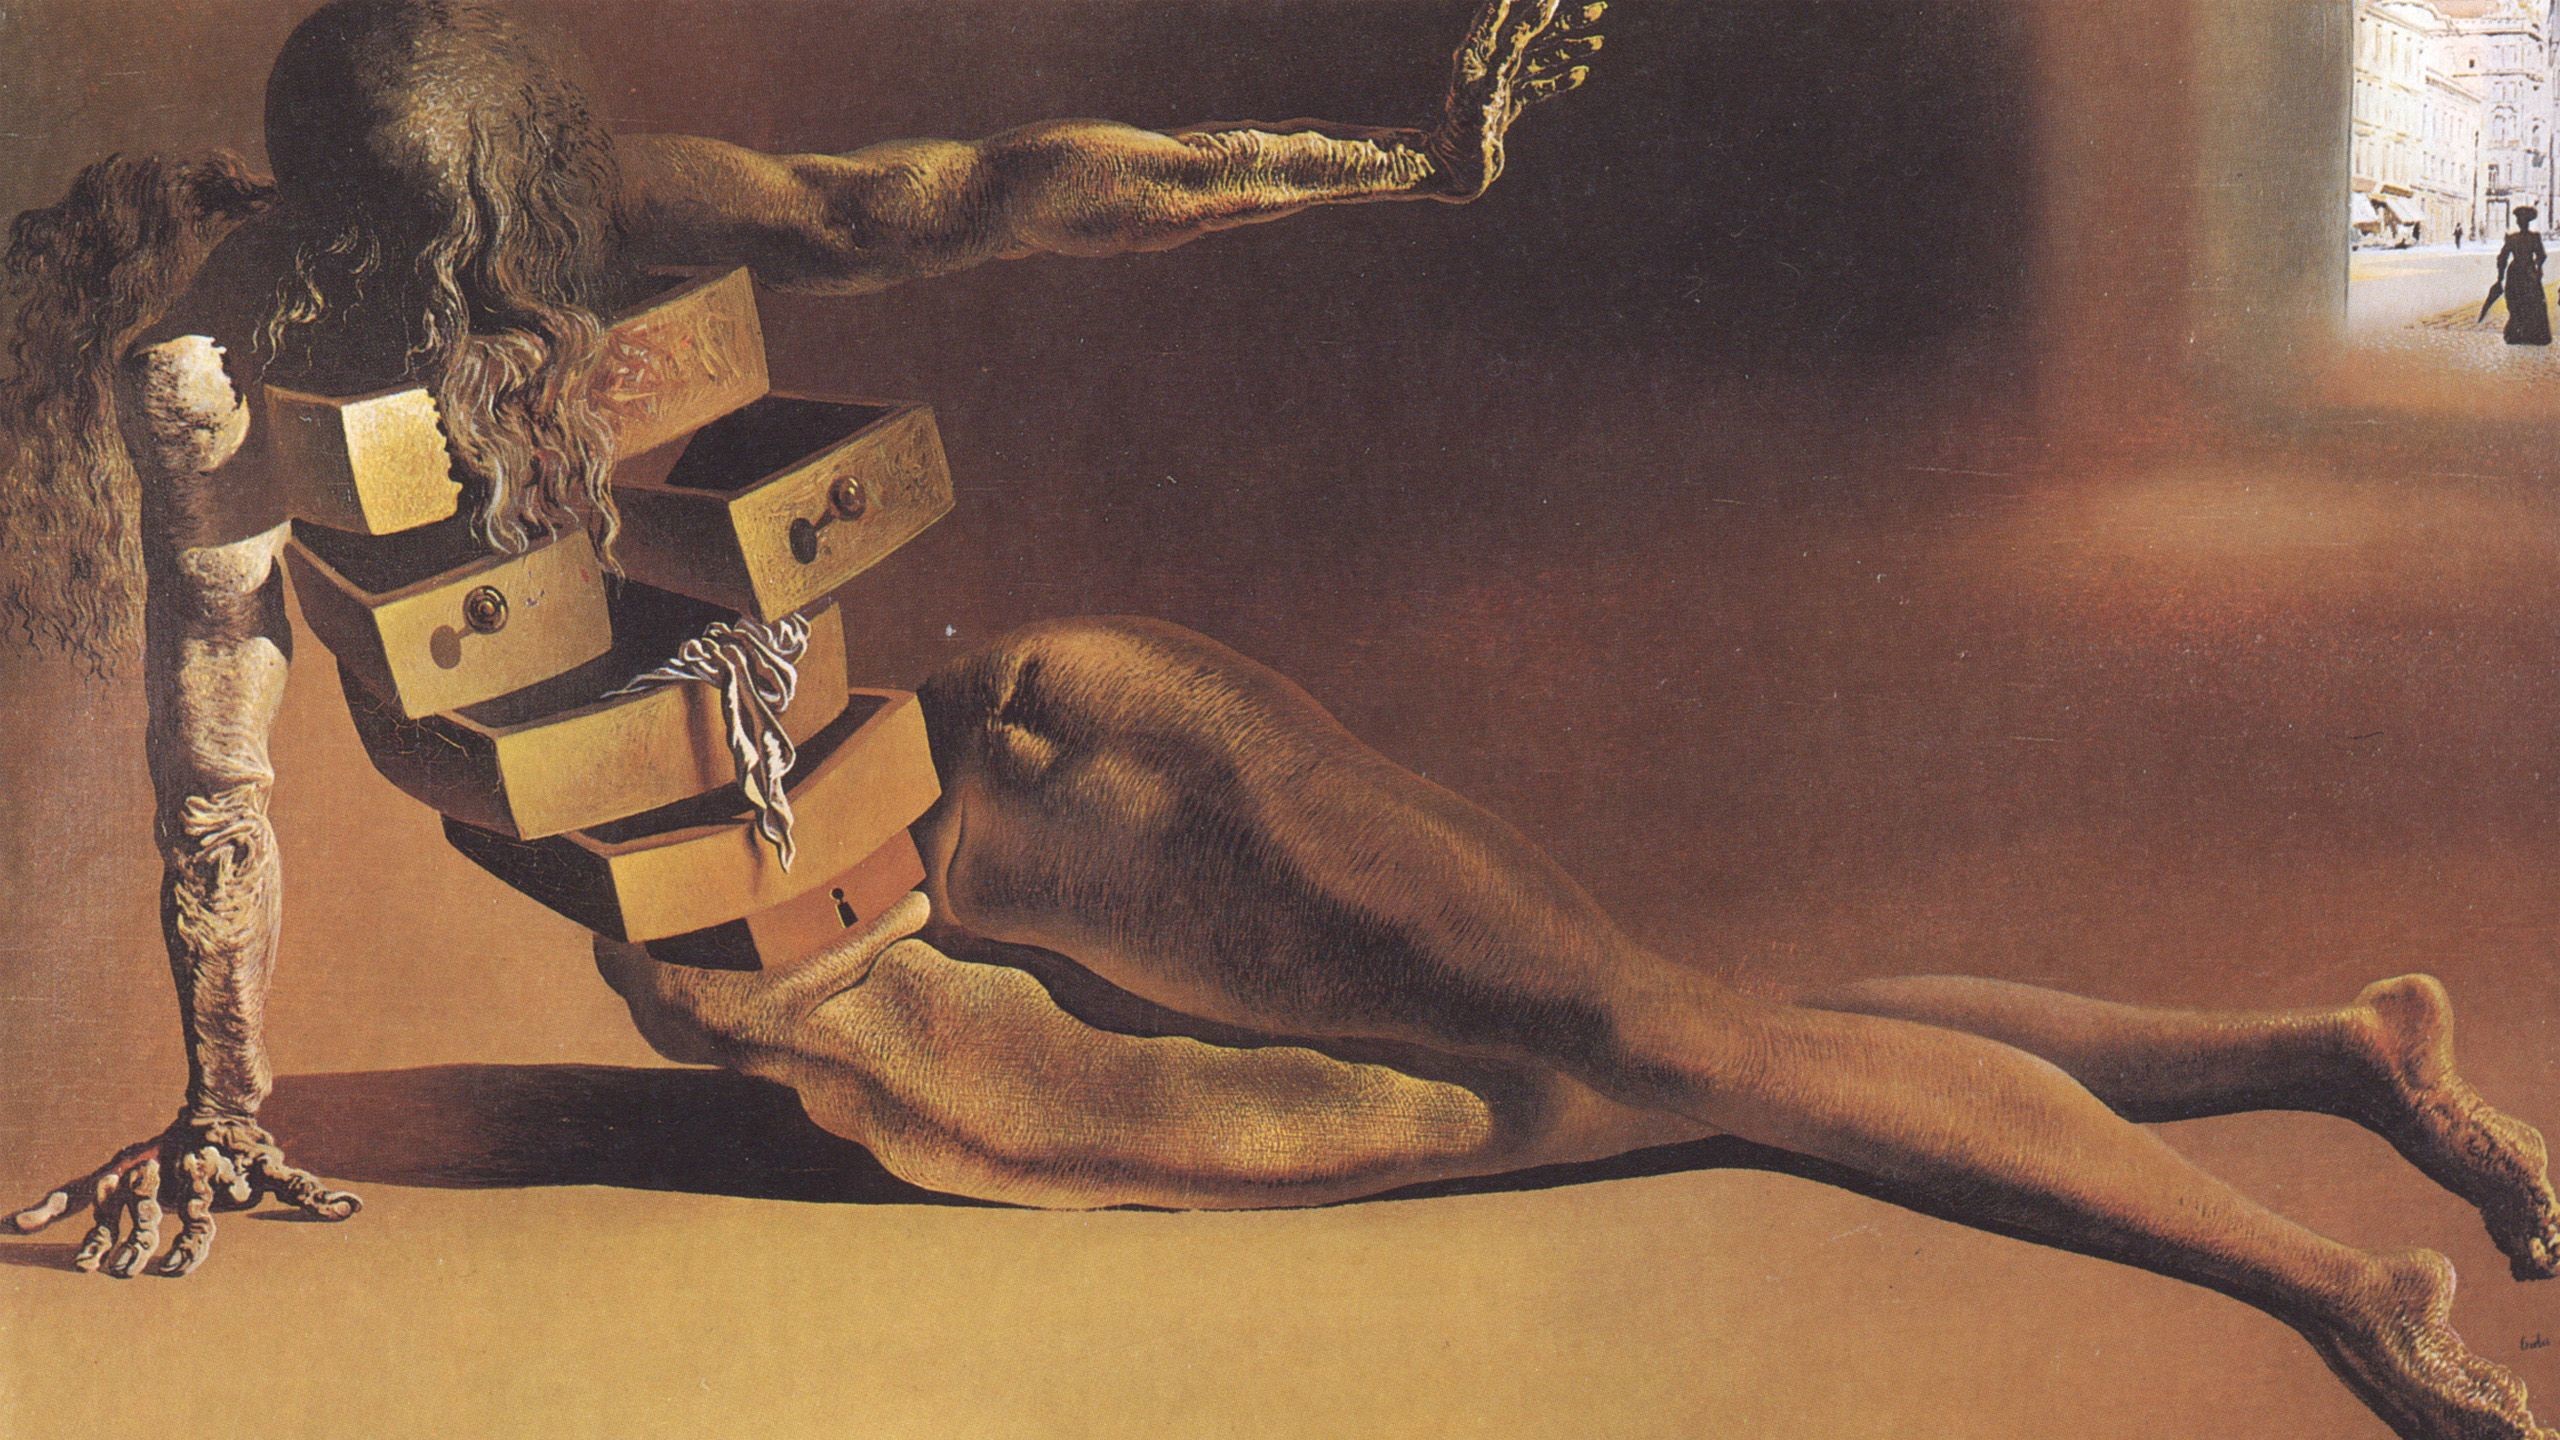 2560x1440 Wallpapers by Salvador Dali - Wallpaper Abyss